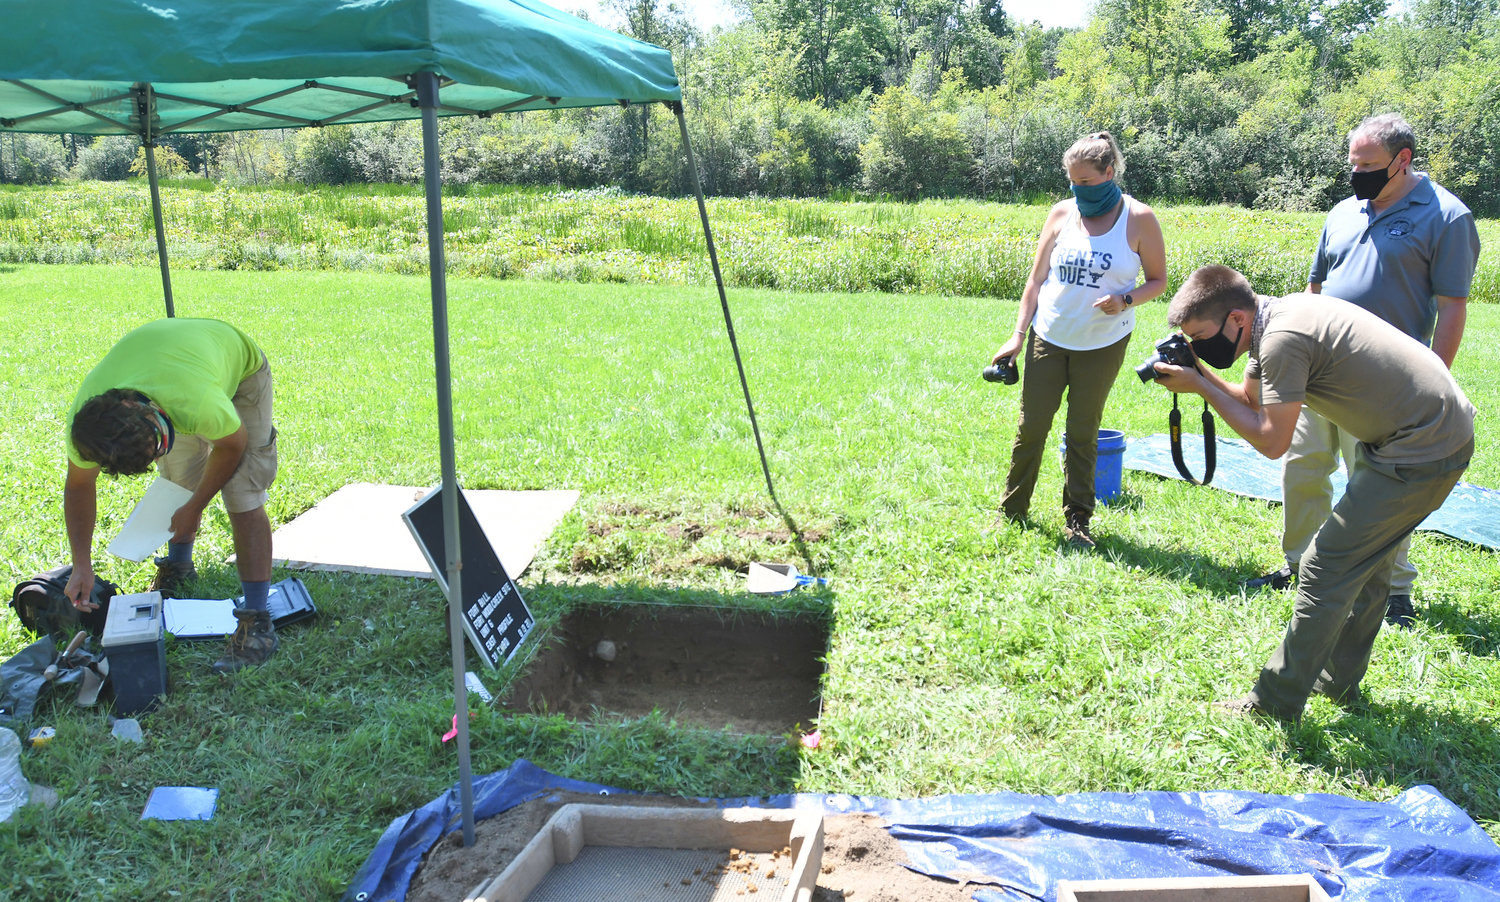 Fort Bull dig left to right Paul Brown- field tech, Laura Klingman- grad student at Binghamton, Josh Anderson- crew chief for public Archaeology Facility  and Art Simmons from Rome Historical Society. Anderson is documenting/photographying the soil at the Fort Bull dig.